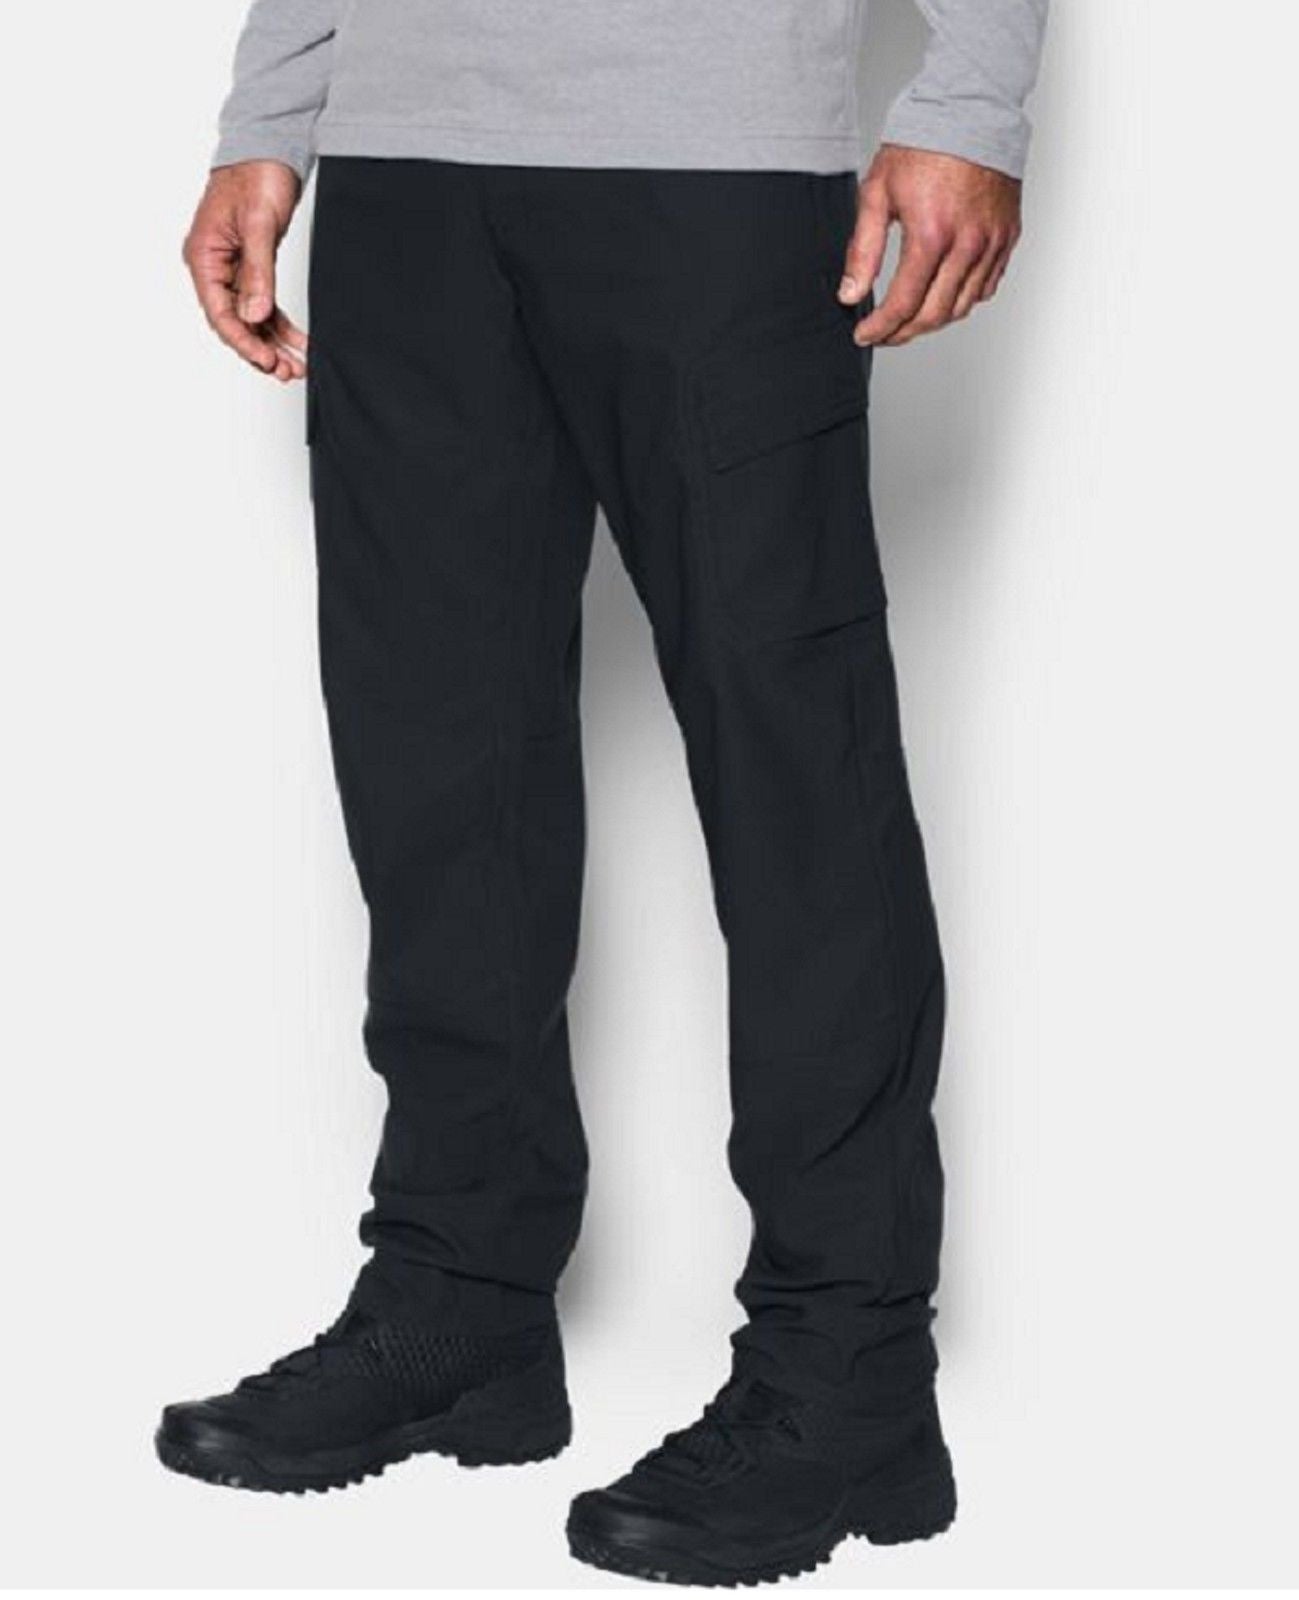 Under Armour Storm Covert Tactical Field Duty Work Pants -Black or